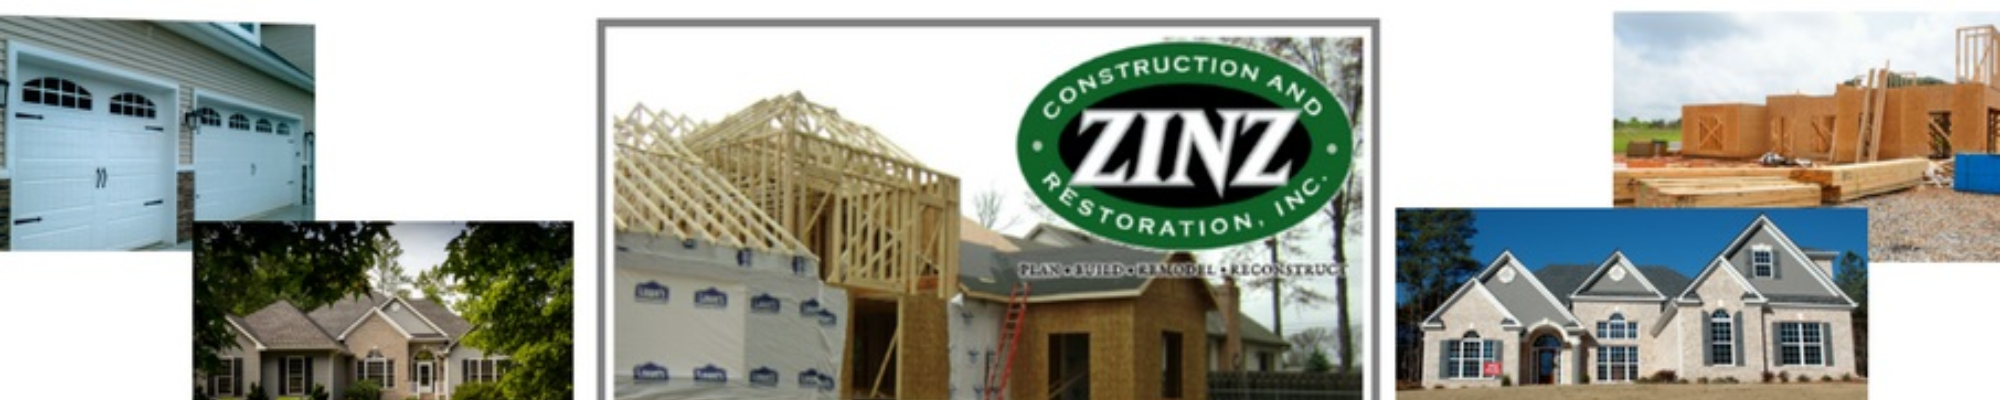 Zinz Design and Selection Center Inc in Austintown, OH